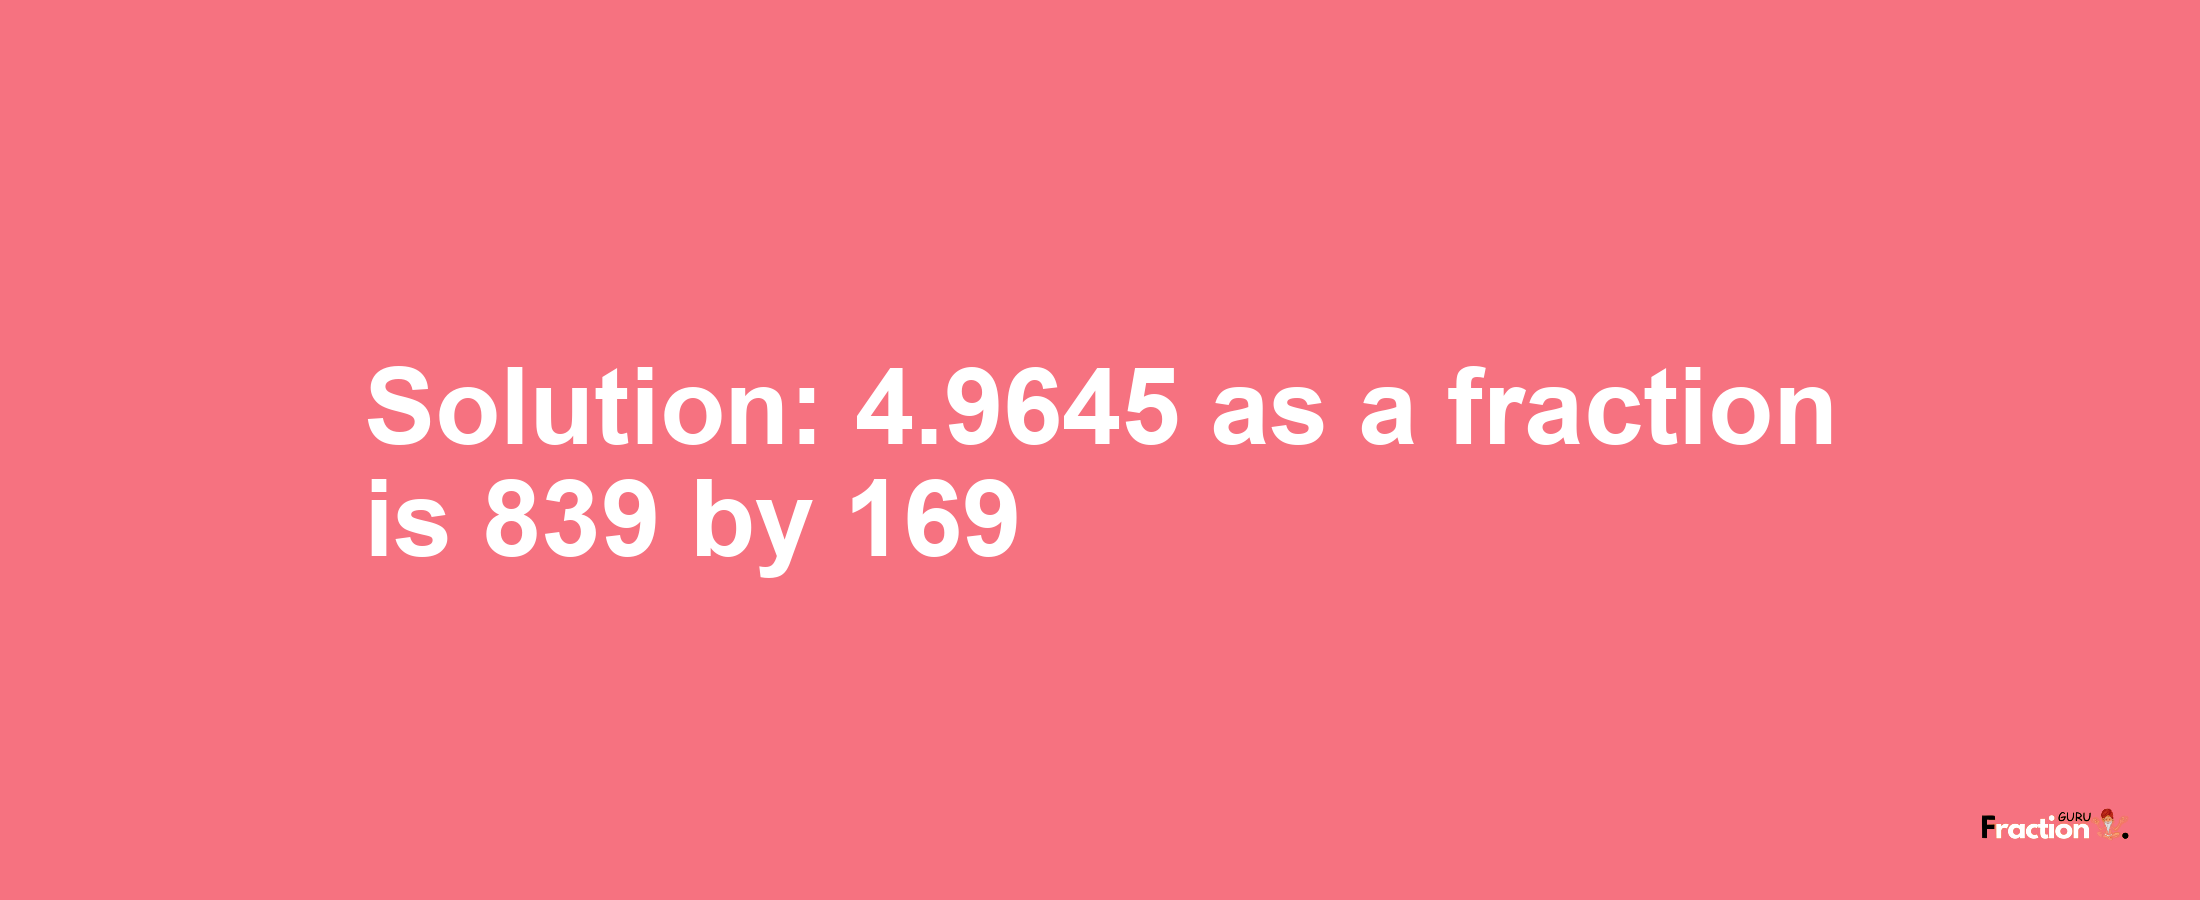 Solution:4.9645 as a fraction is 839/169